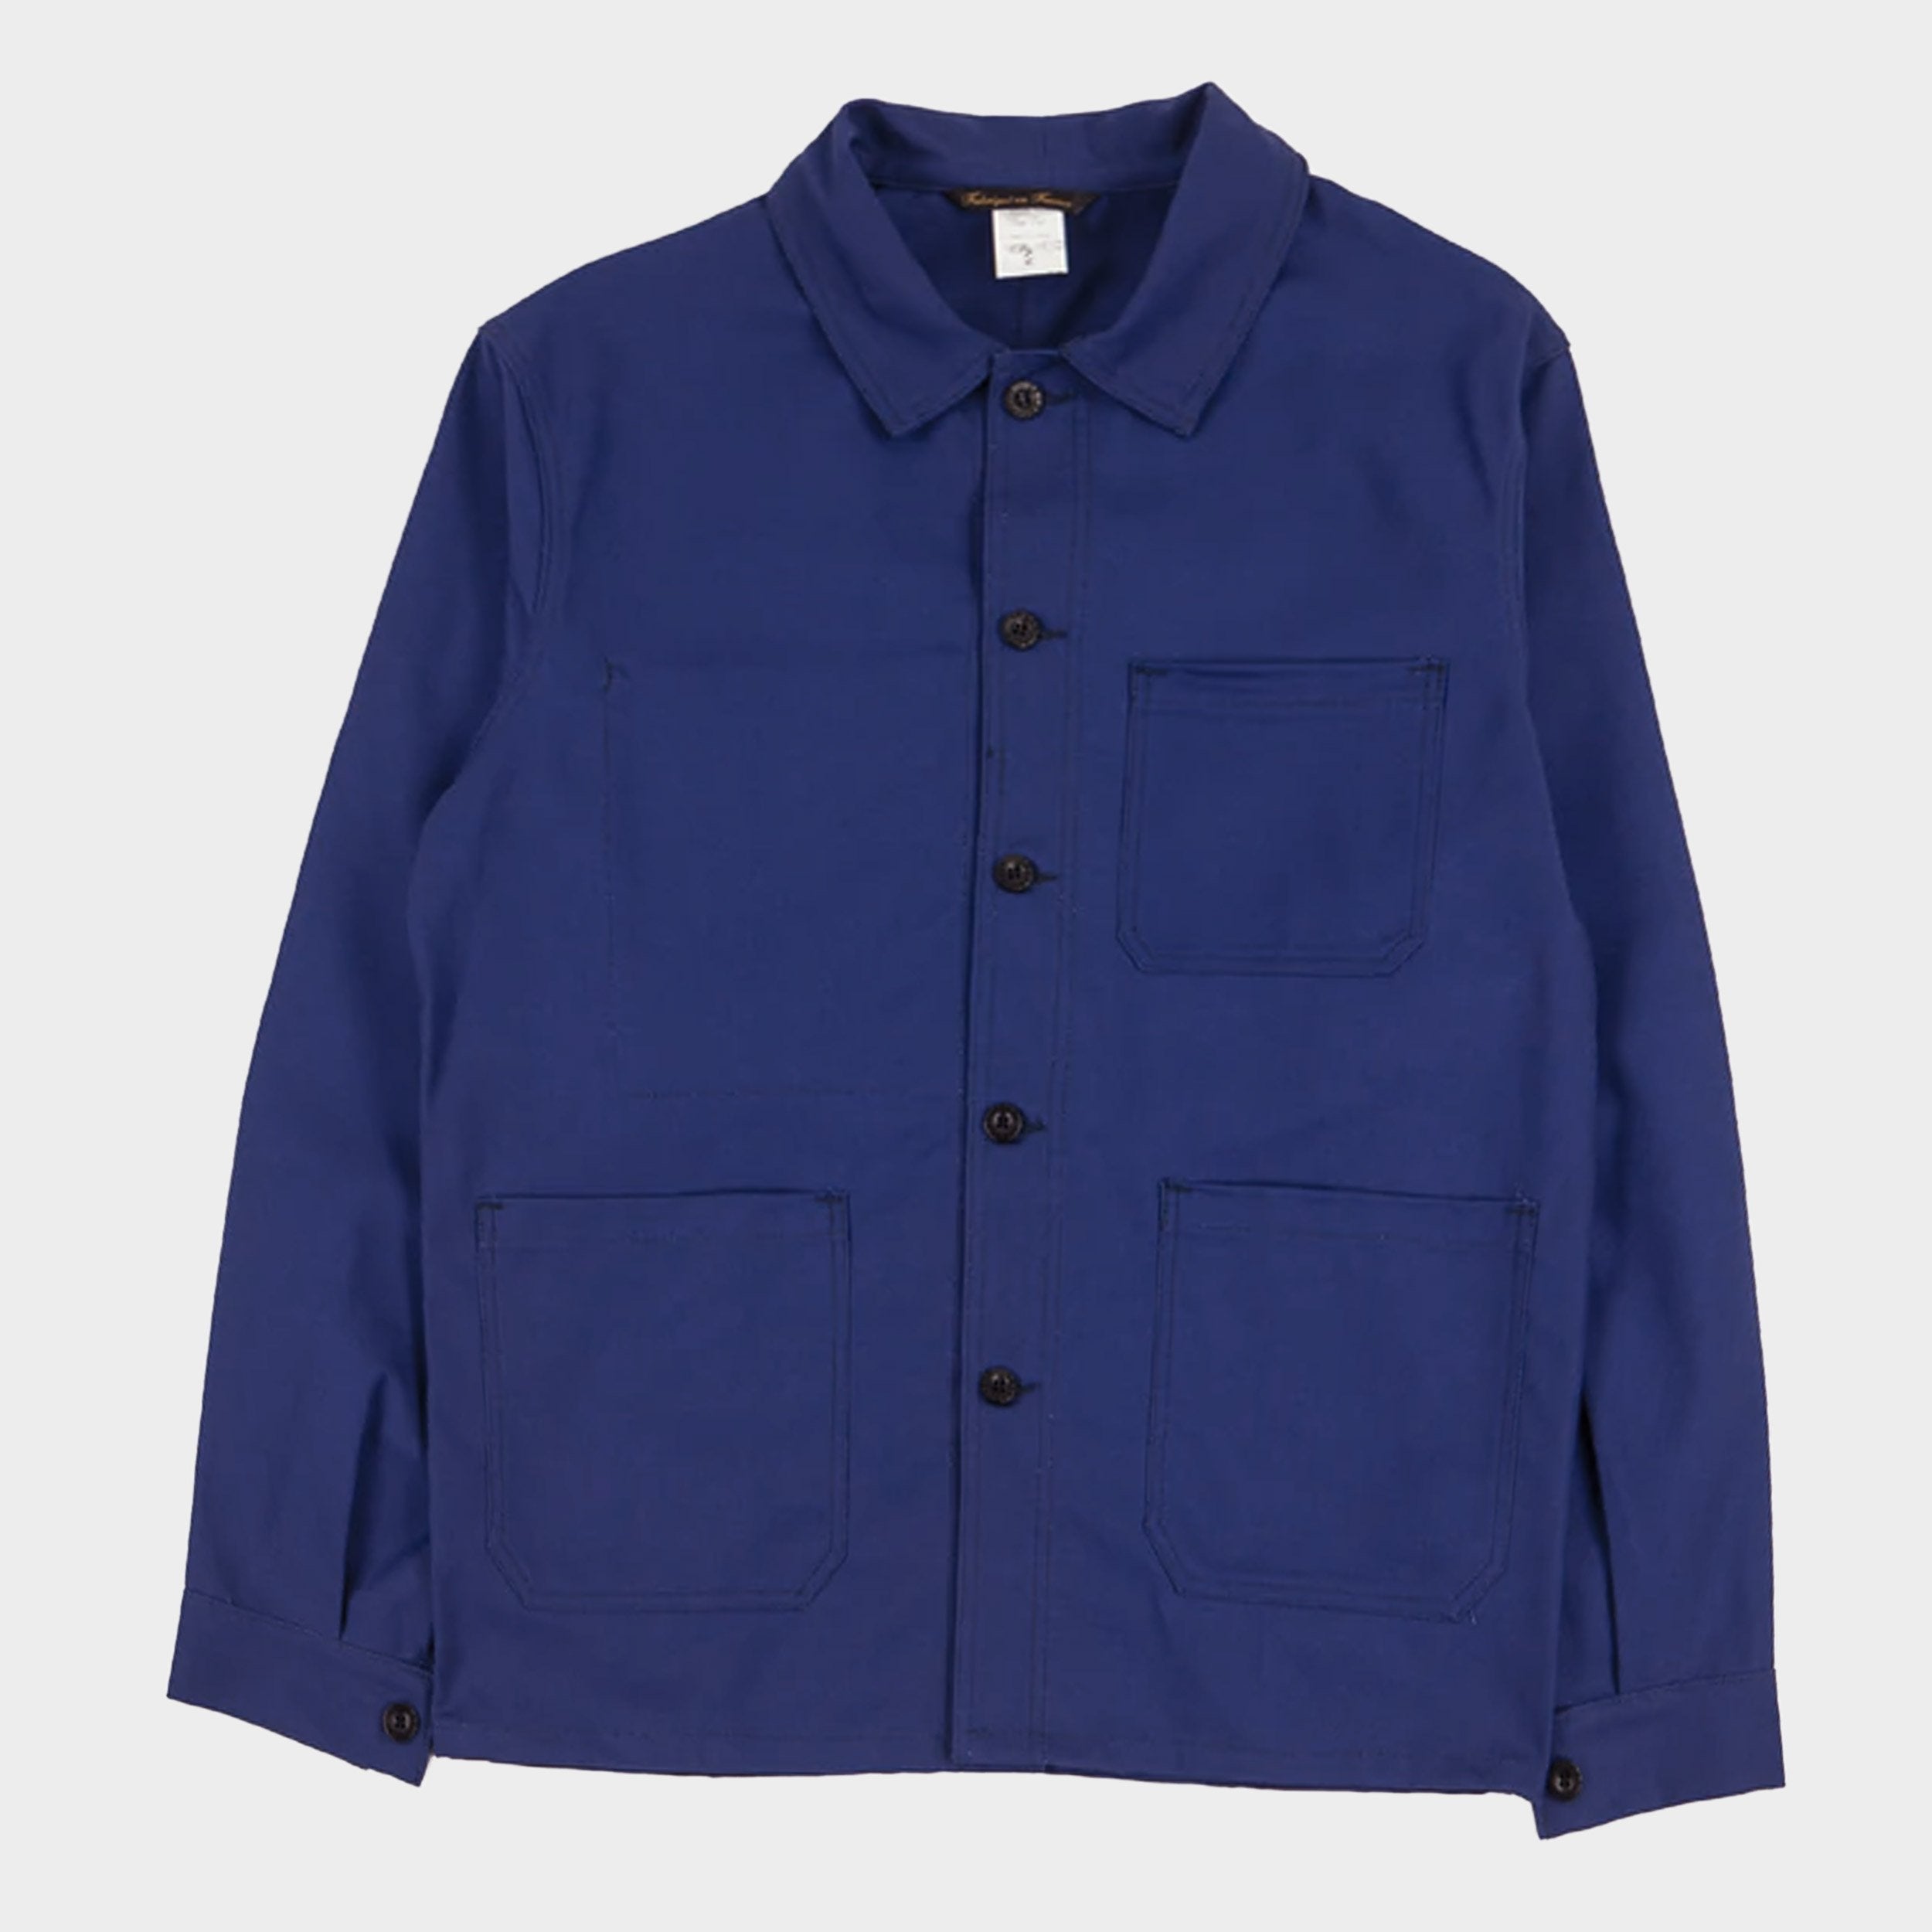 Le Laboureur French Cotton Work Jacket in Navy Blue